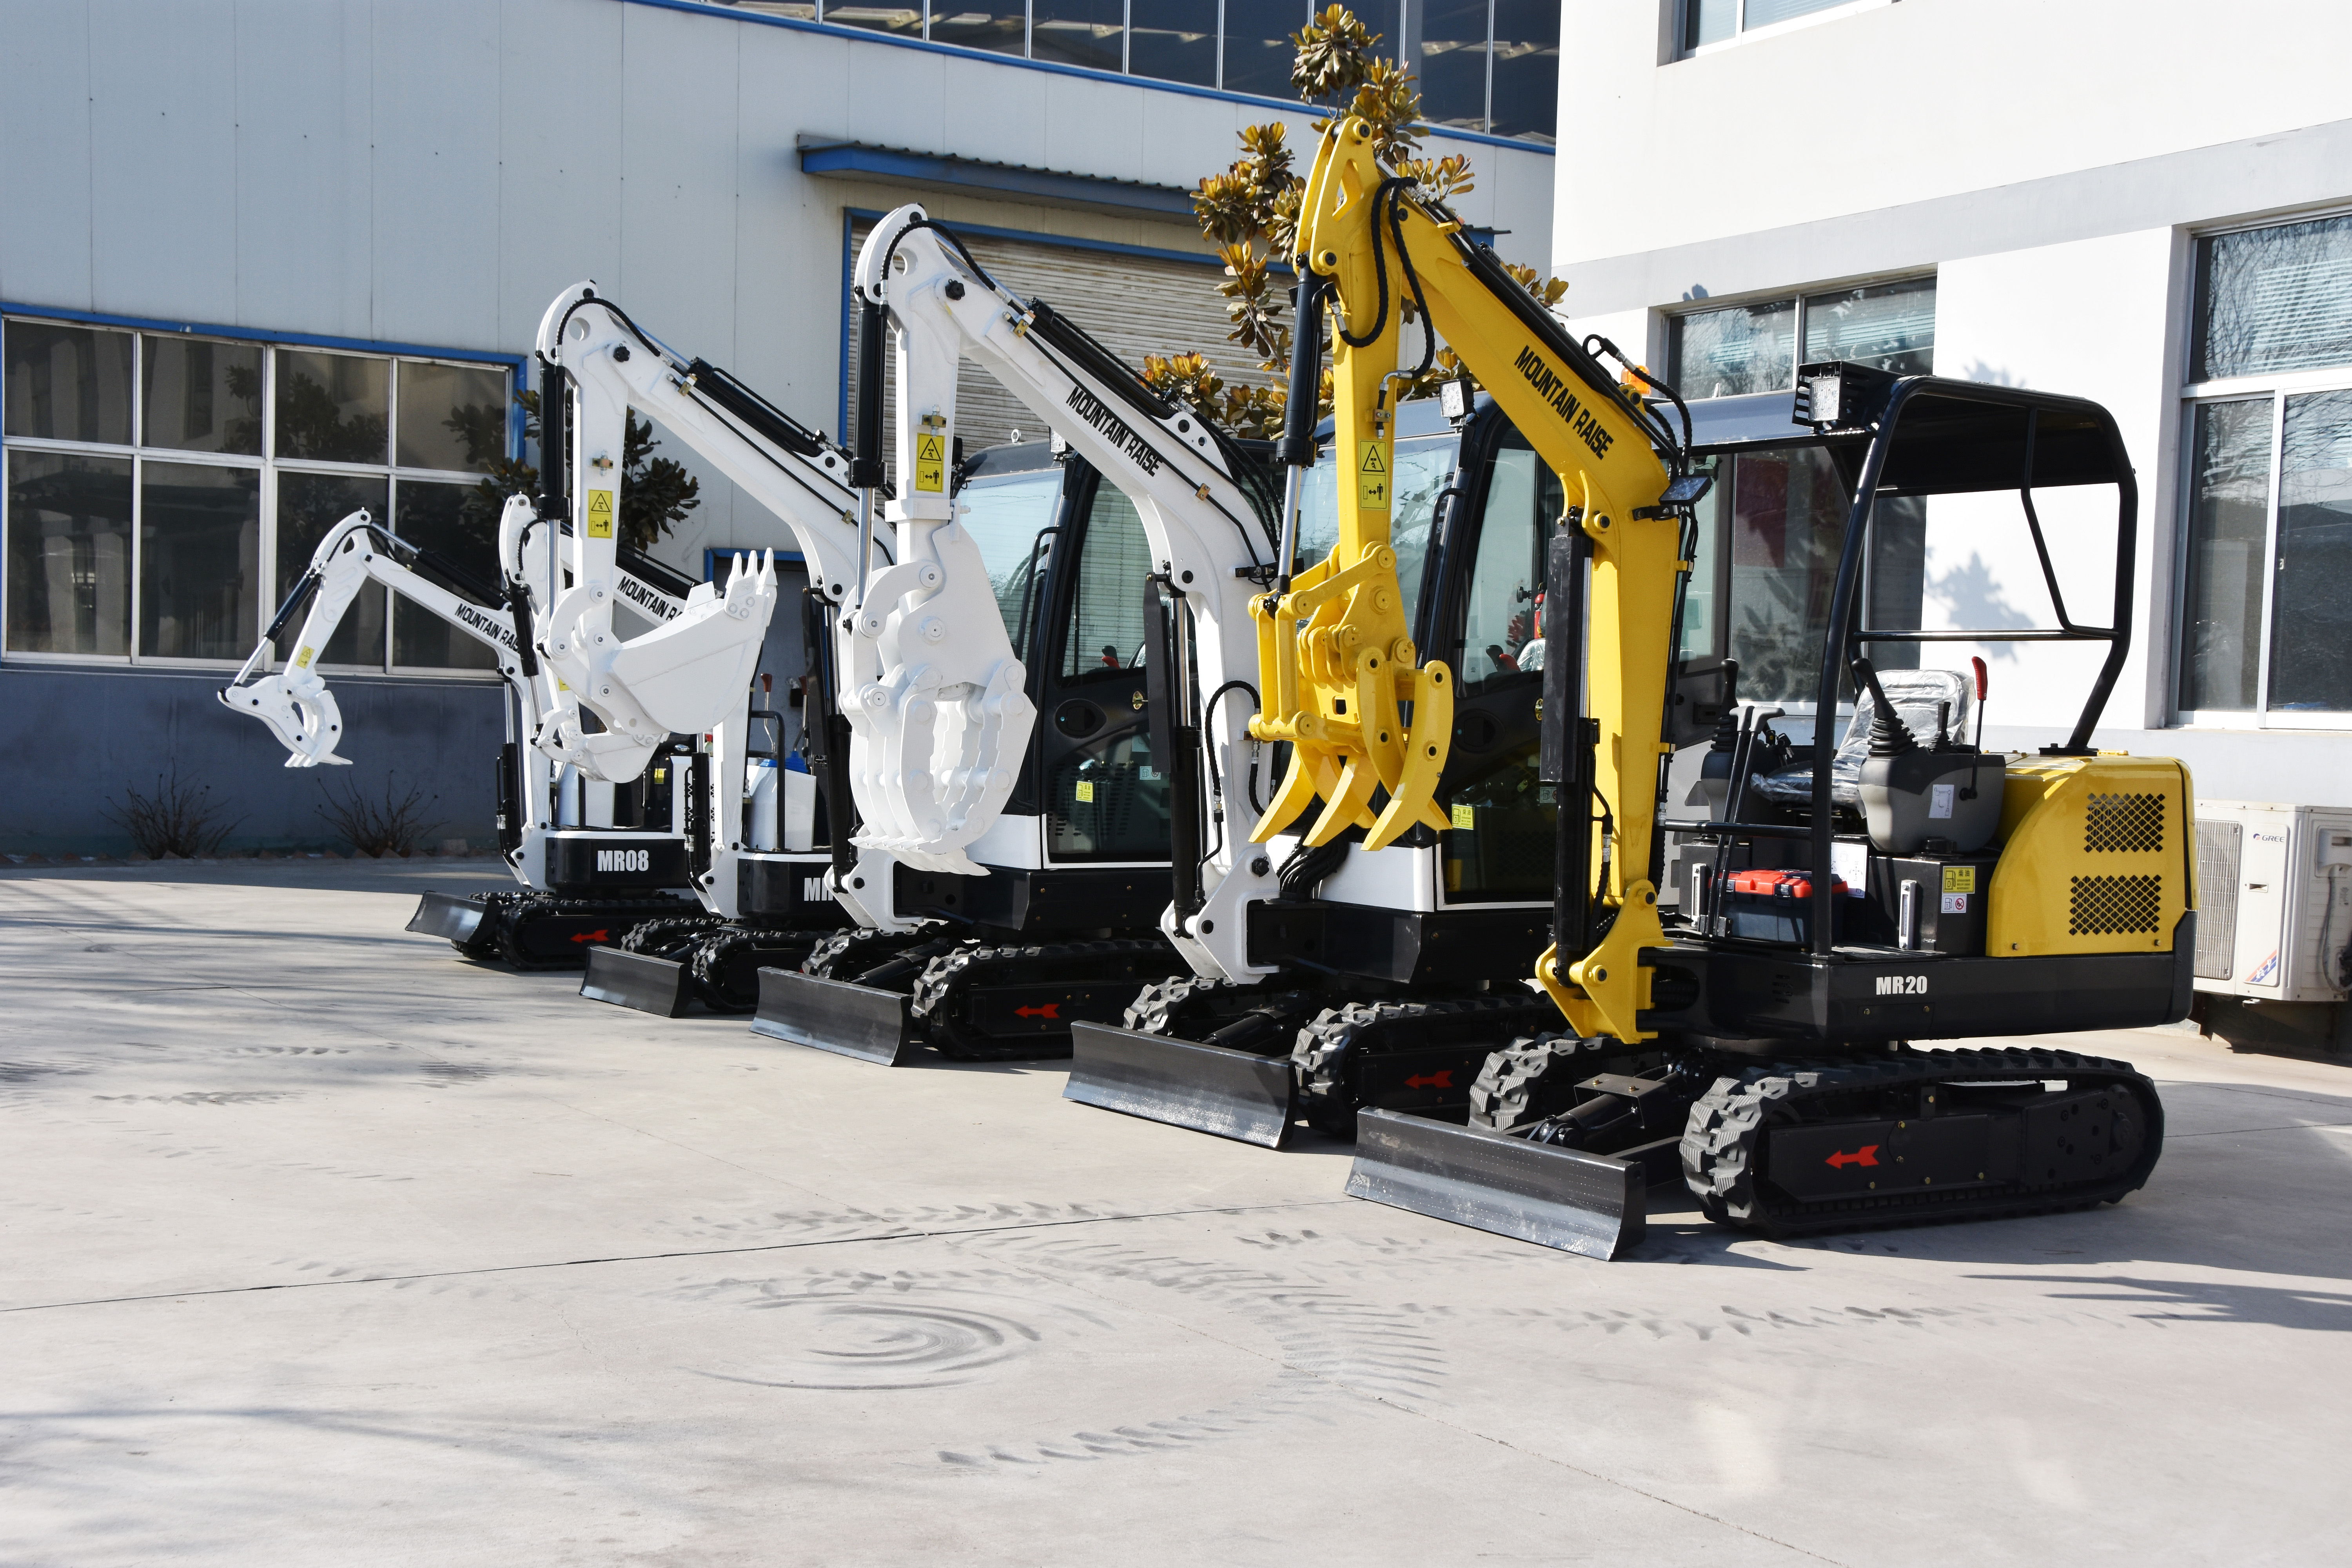 Welcome multiple good construction machinery market demand is expected to rebound